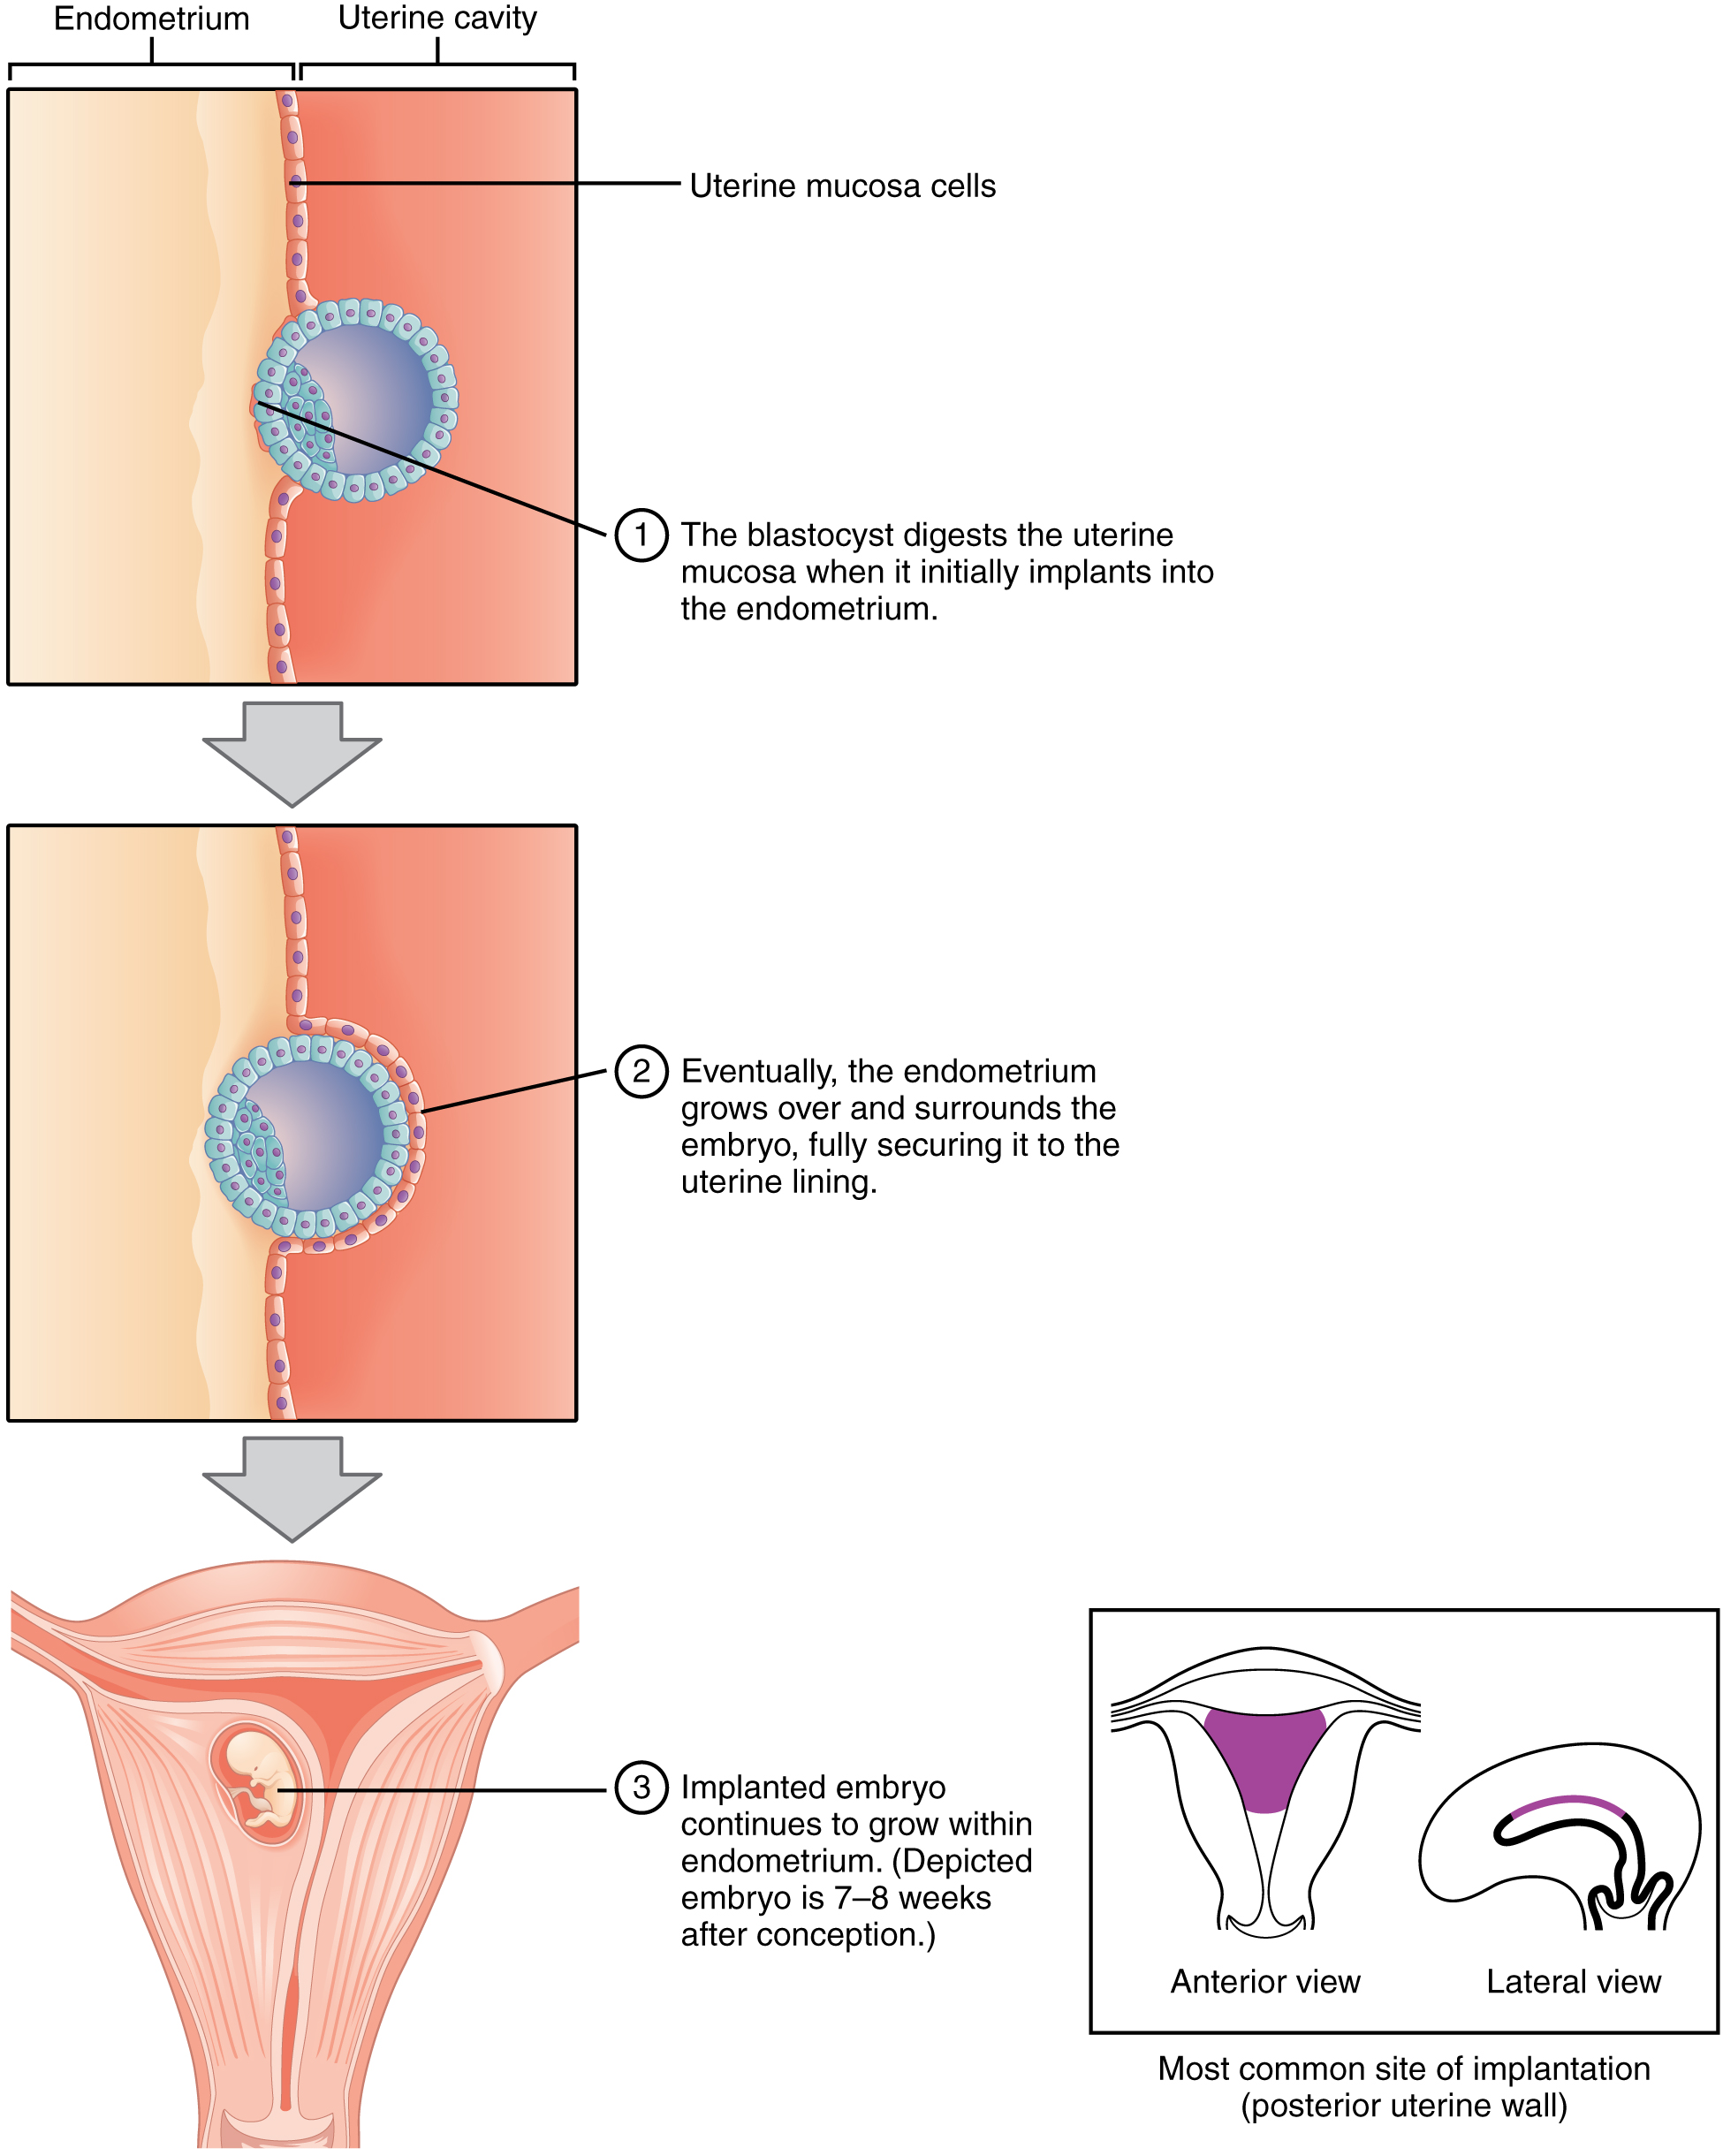 This figure shows the different steps during implantation. The top panel shows how the blastocyst burrows into the endometrium. The middle panel shows the blastocyst completely surrounded by the endometrium. The bottom panel shows the implanted embryo growing in the uterus.